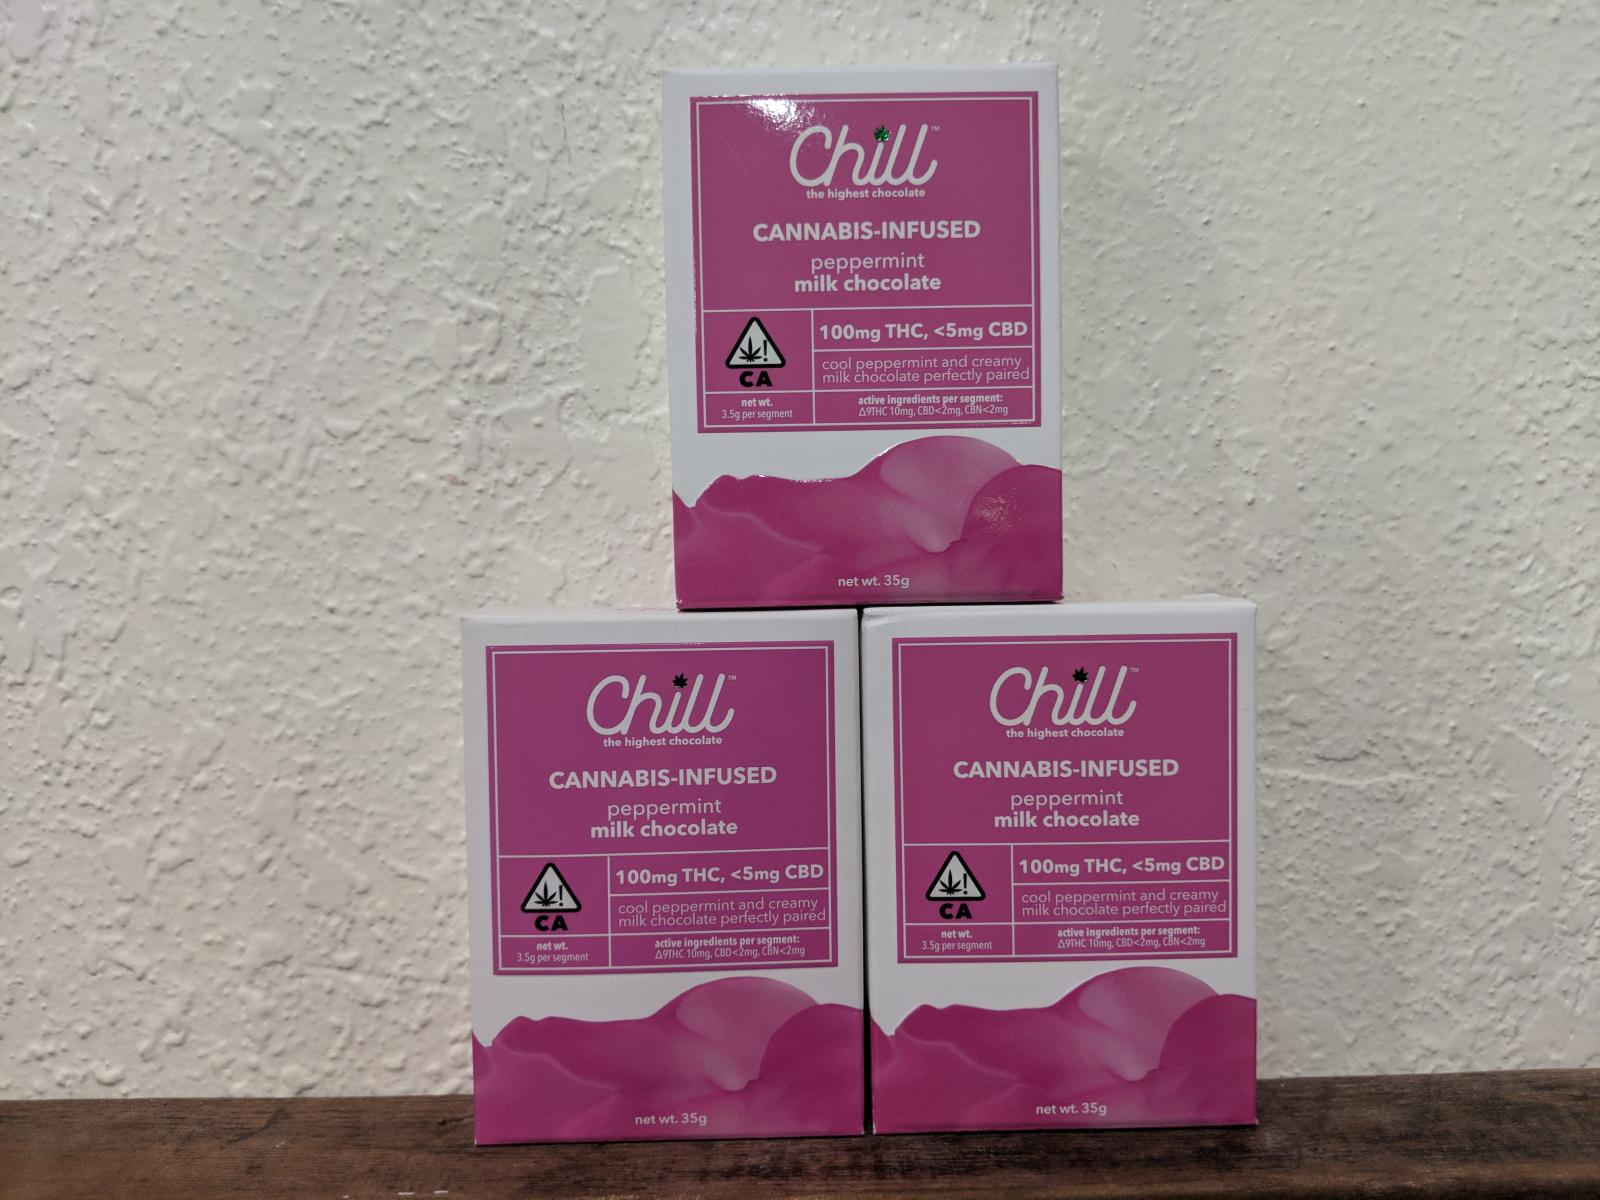 Chill chocolates 100mg THC peppermint